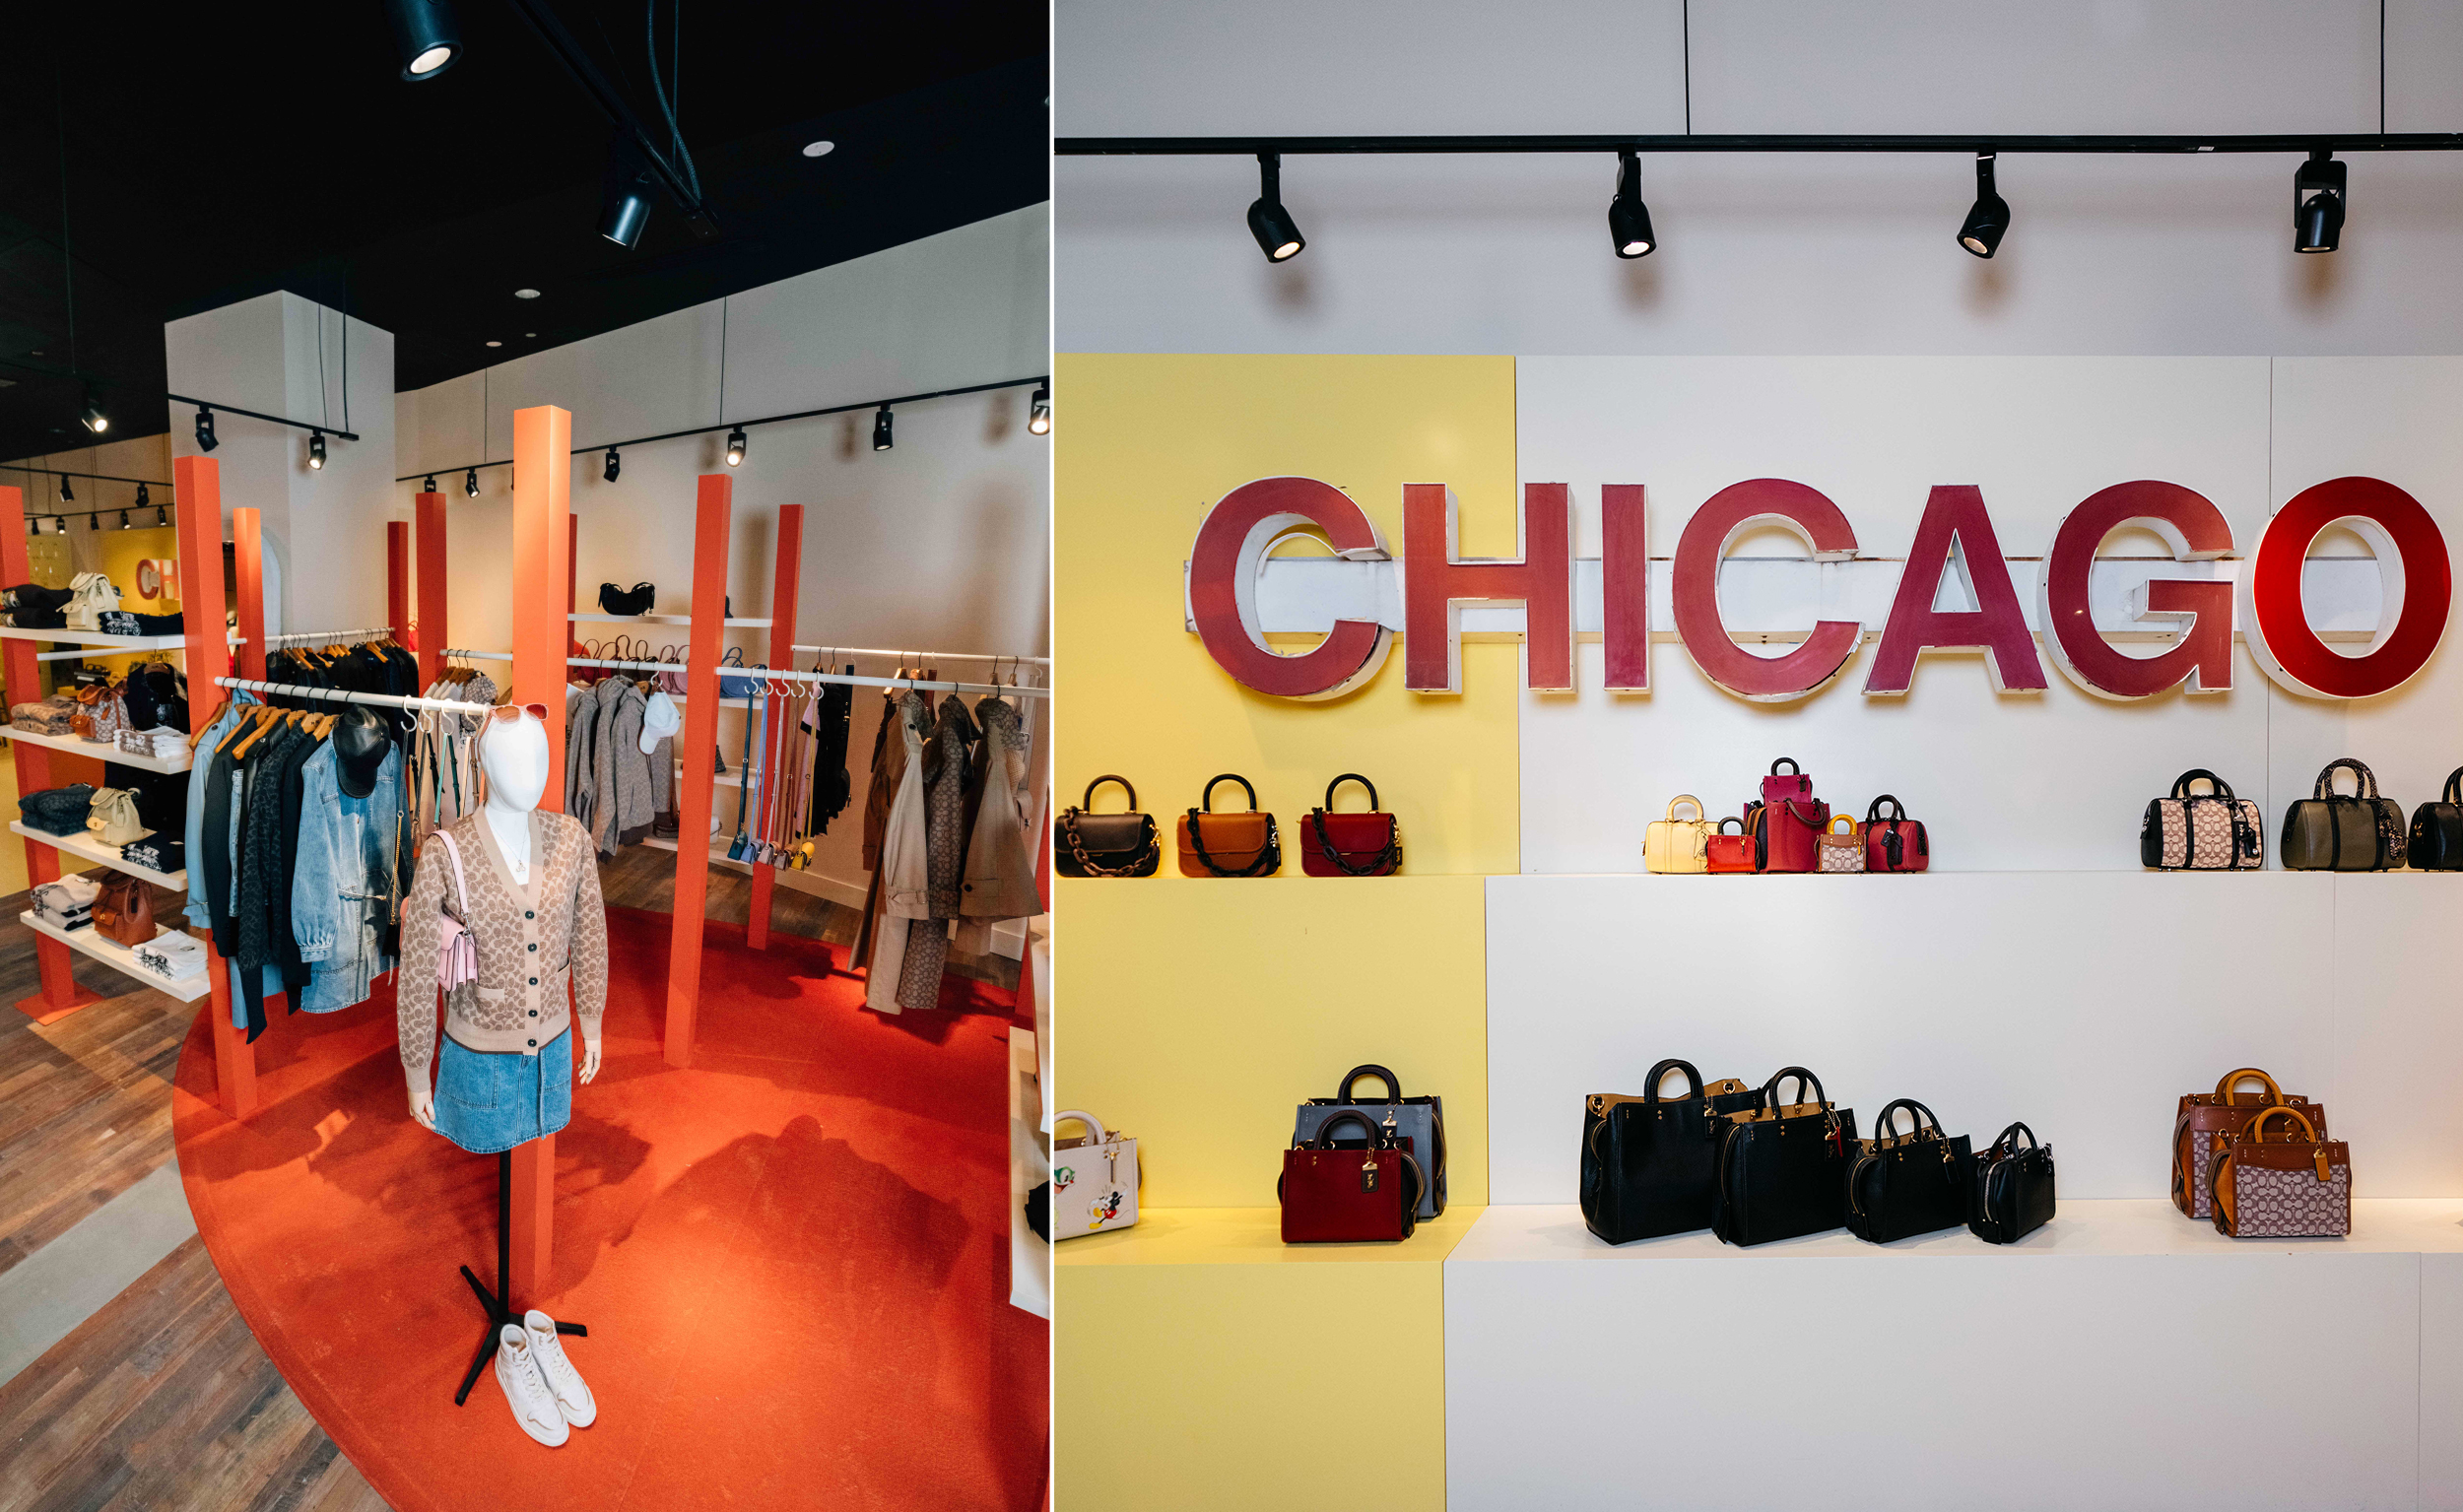 On Location: Coach in Chicago, Singapore, and Tokyo